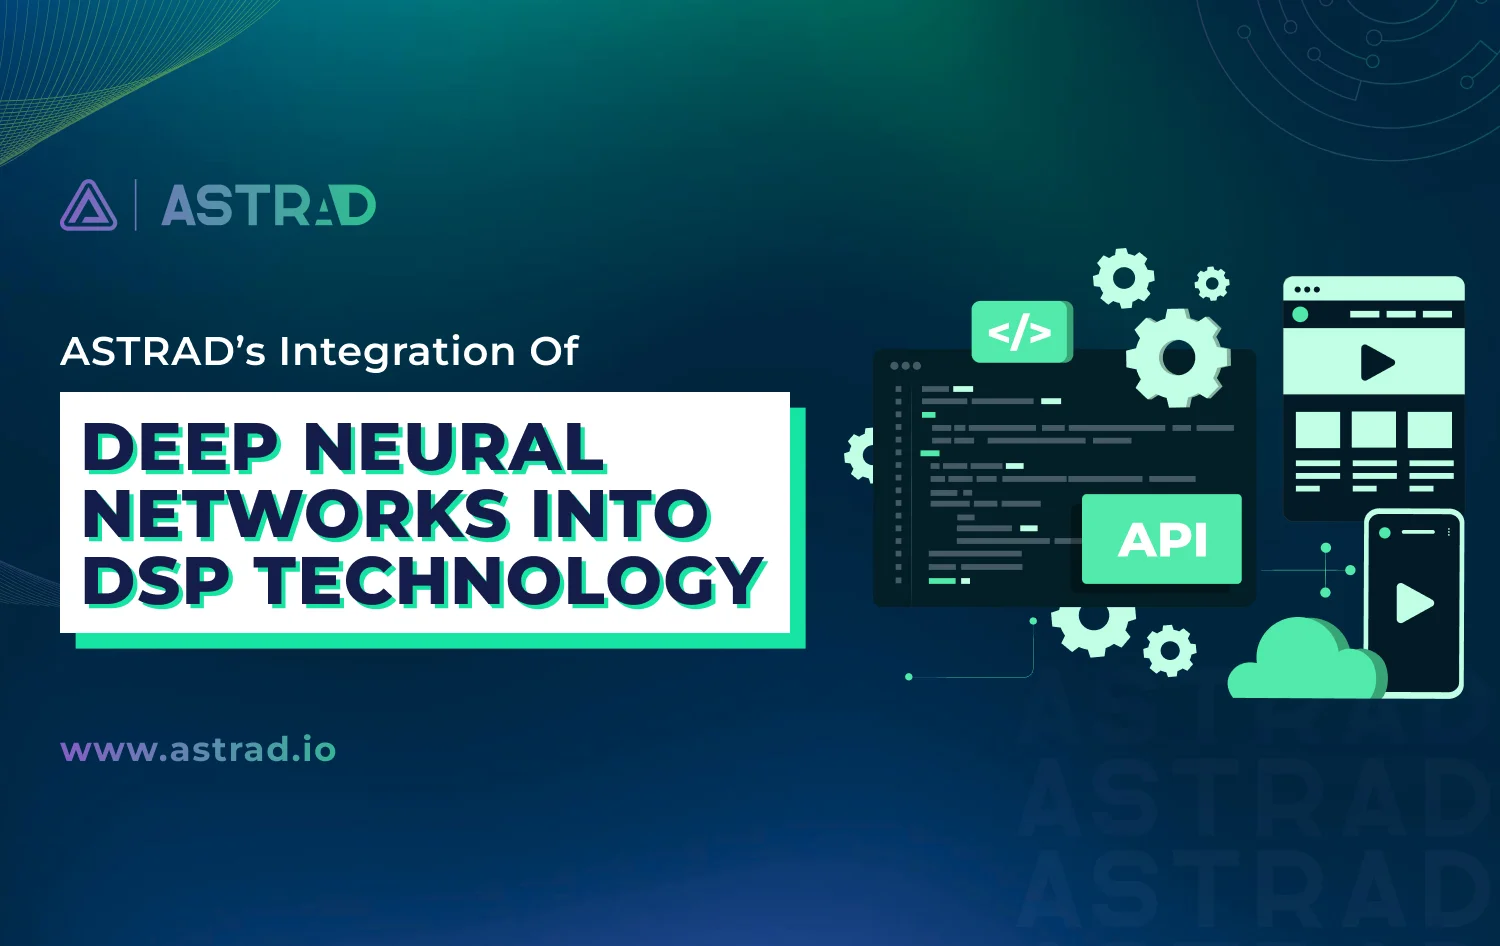 ASTRAD’s Integration of Deep Neural Networks into DSP